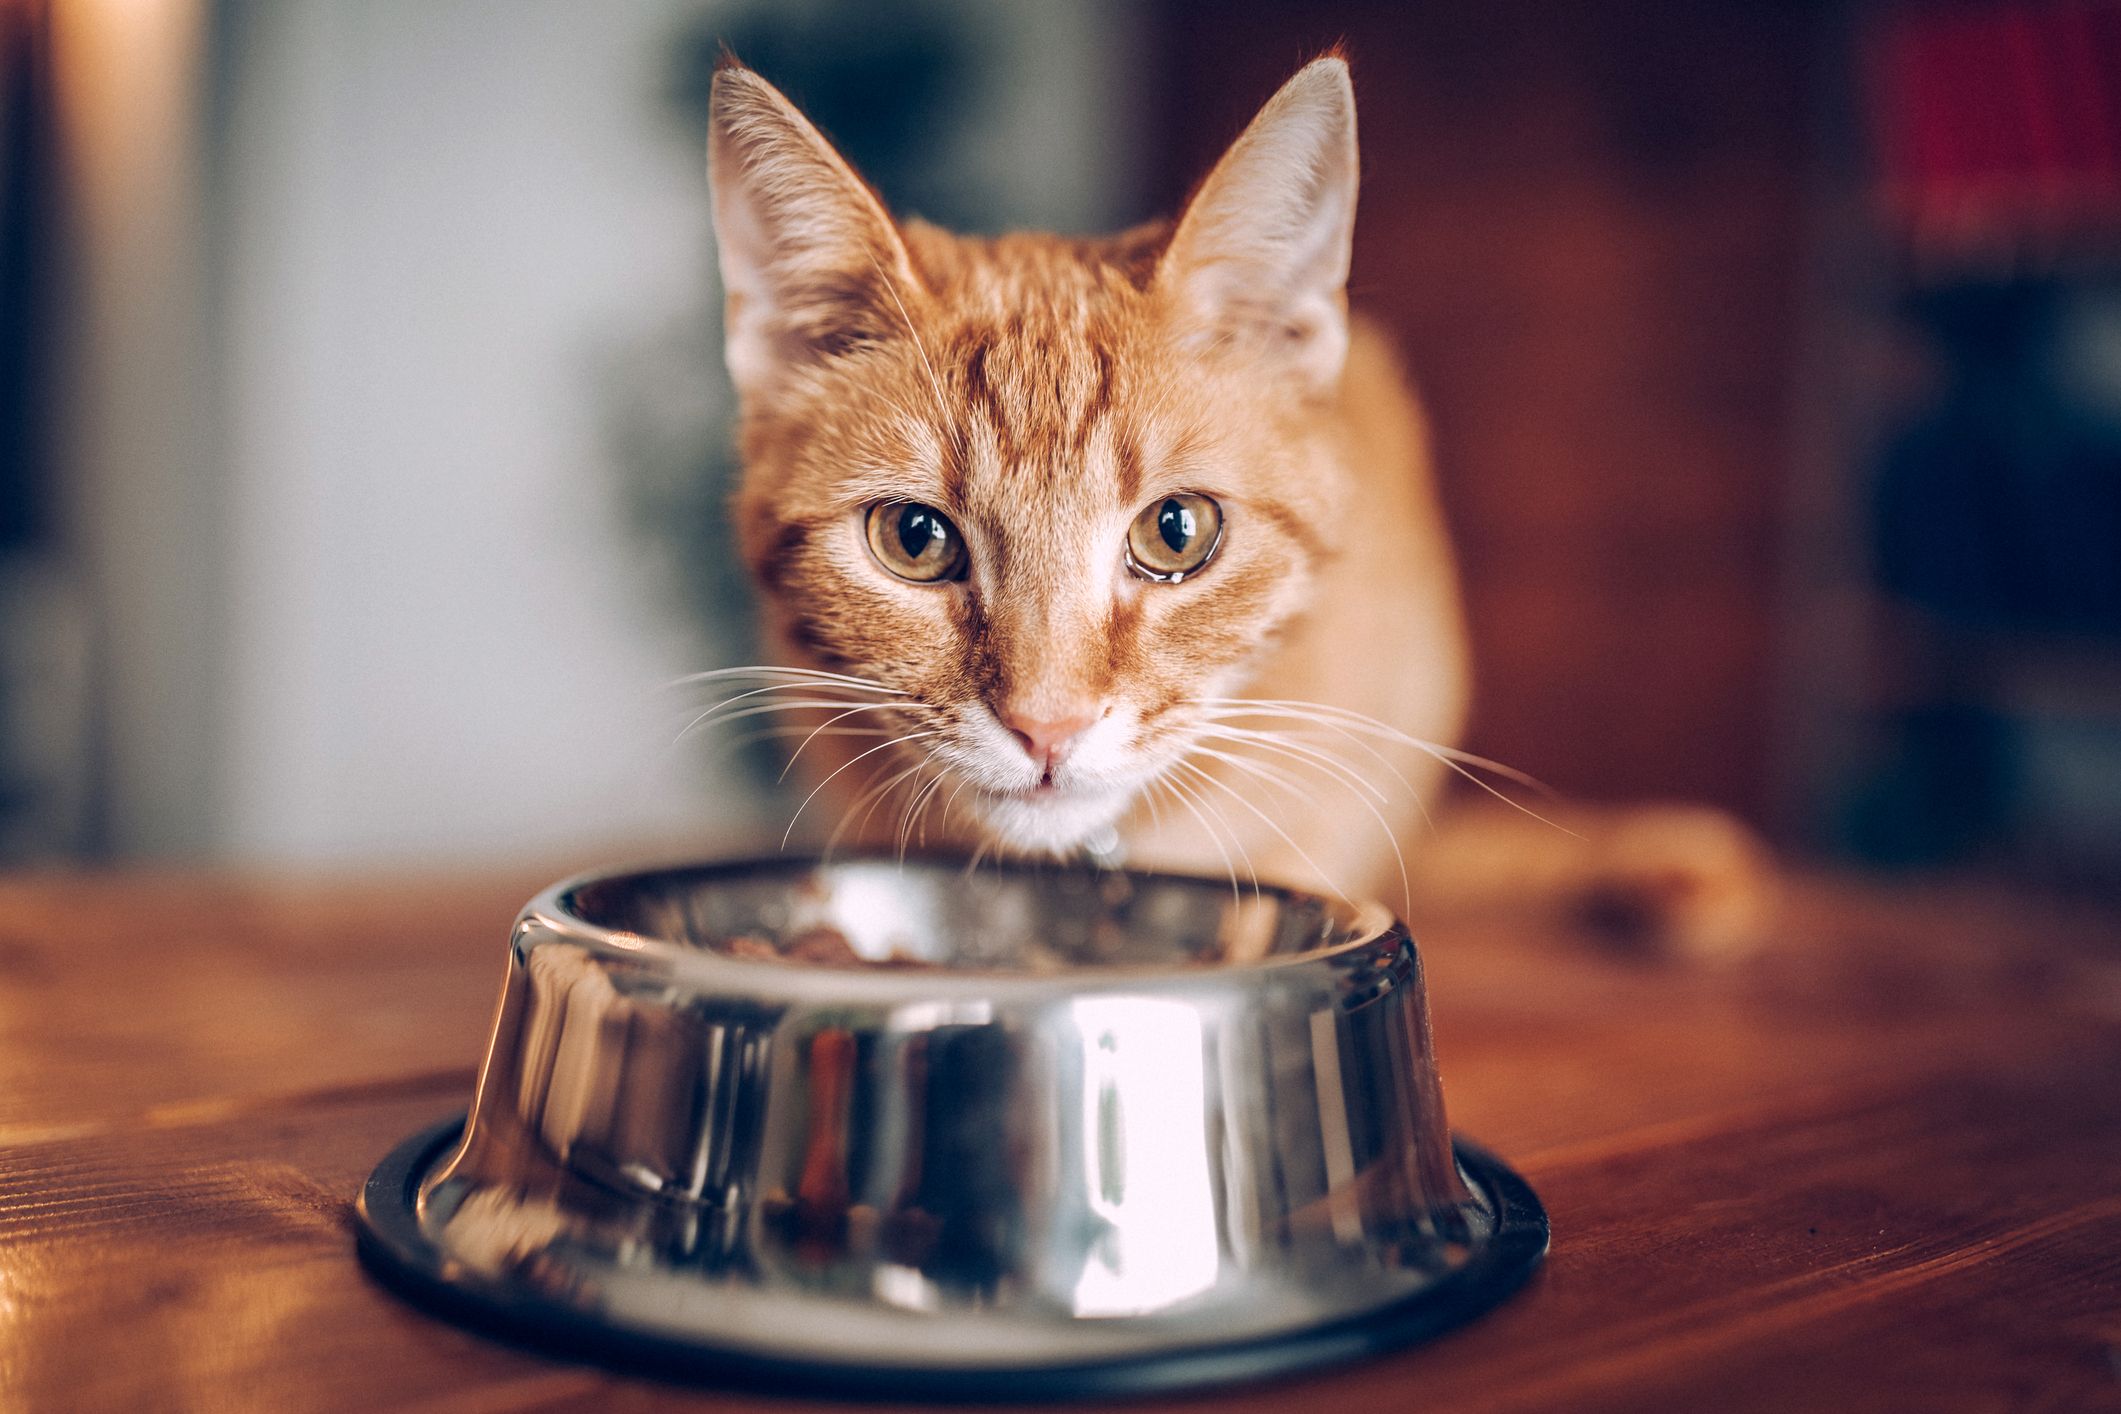 How To Make Homemade Raw Cat Food Thats Safe for Your